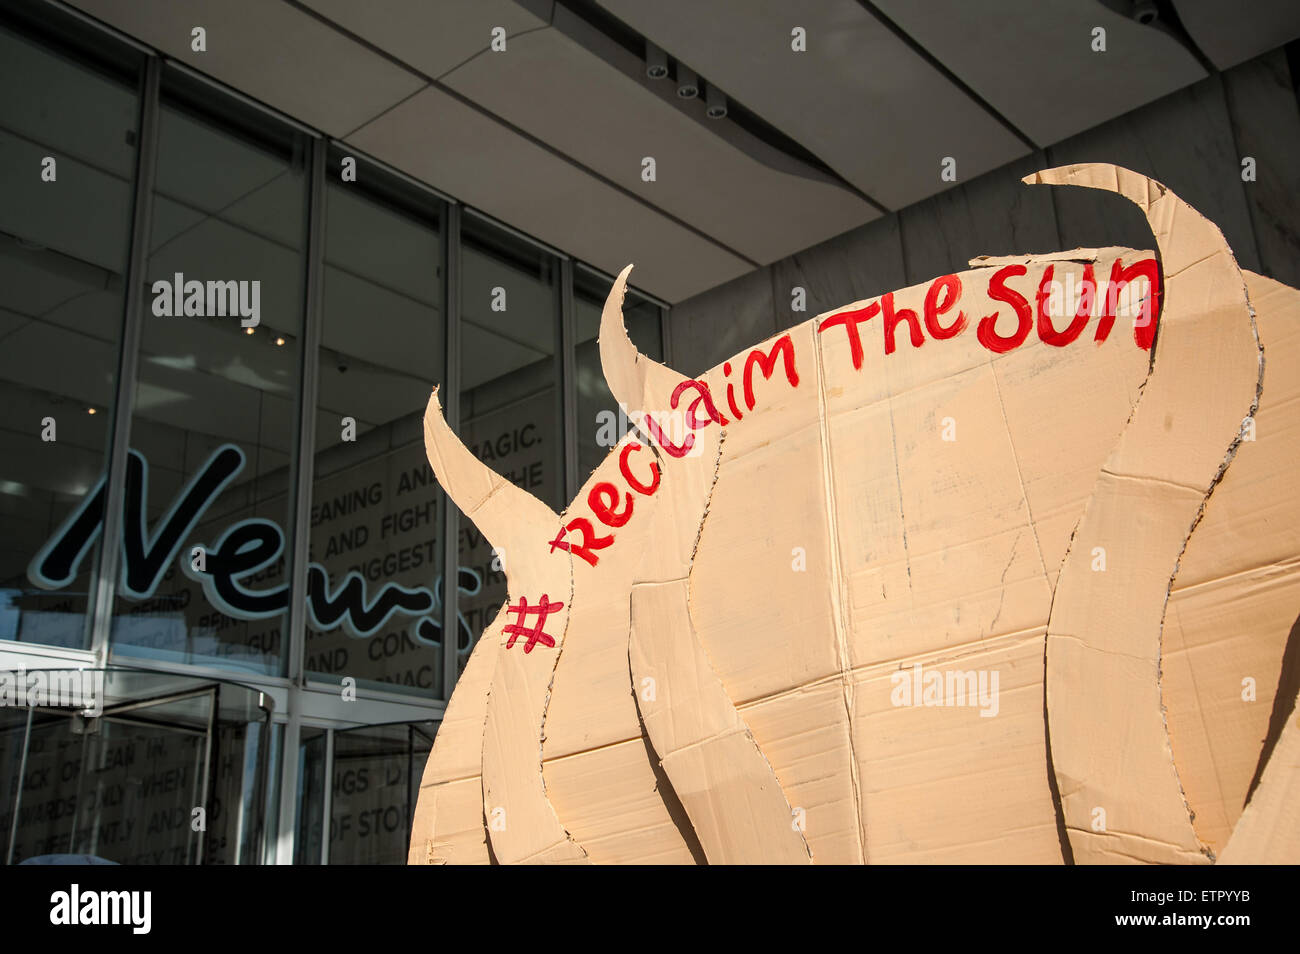 Occupy protesters gather outside the headquarters of News UK, owners of the Sun newspaper to hold an 'Occupy Rupert Murdoch' protest and hand out copies of 'The Occupied Sun.'  Featuring: View Where: London, United Kingdom When: 23 Mar 2015 Credit: Peter Maclaine/WENN.com Stock Photo